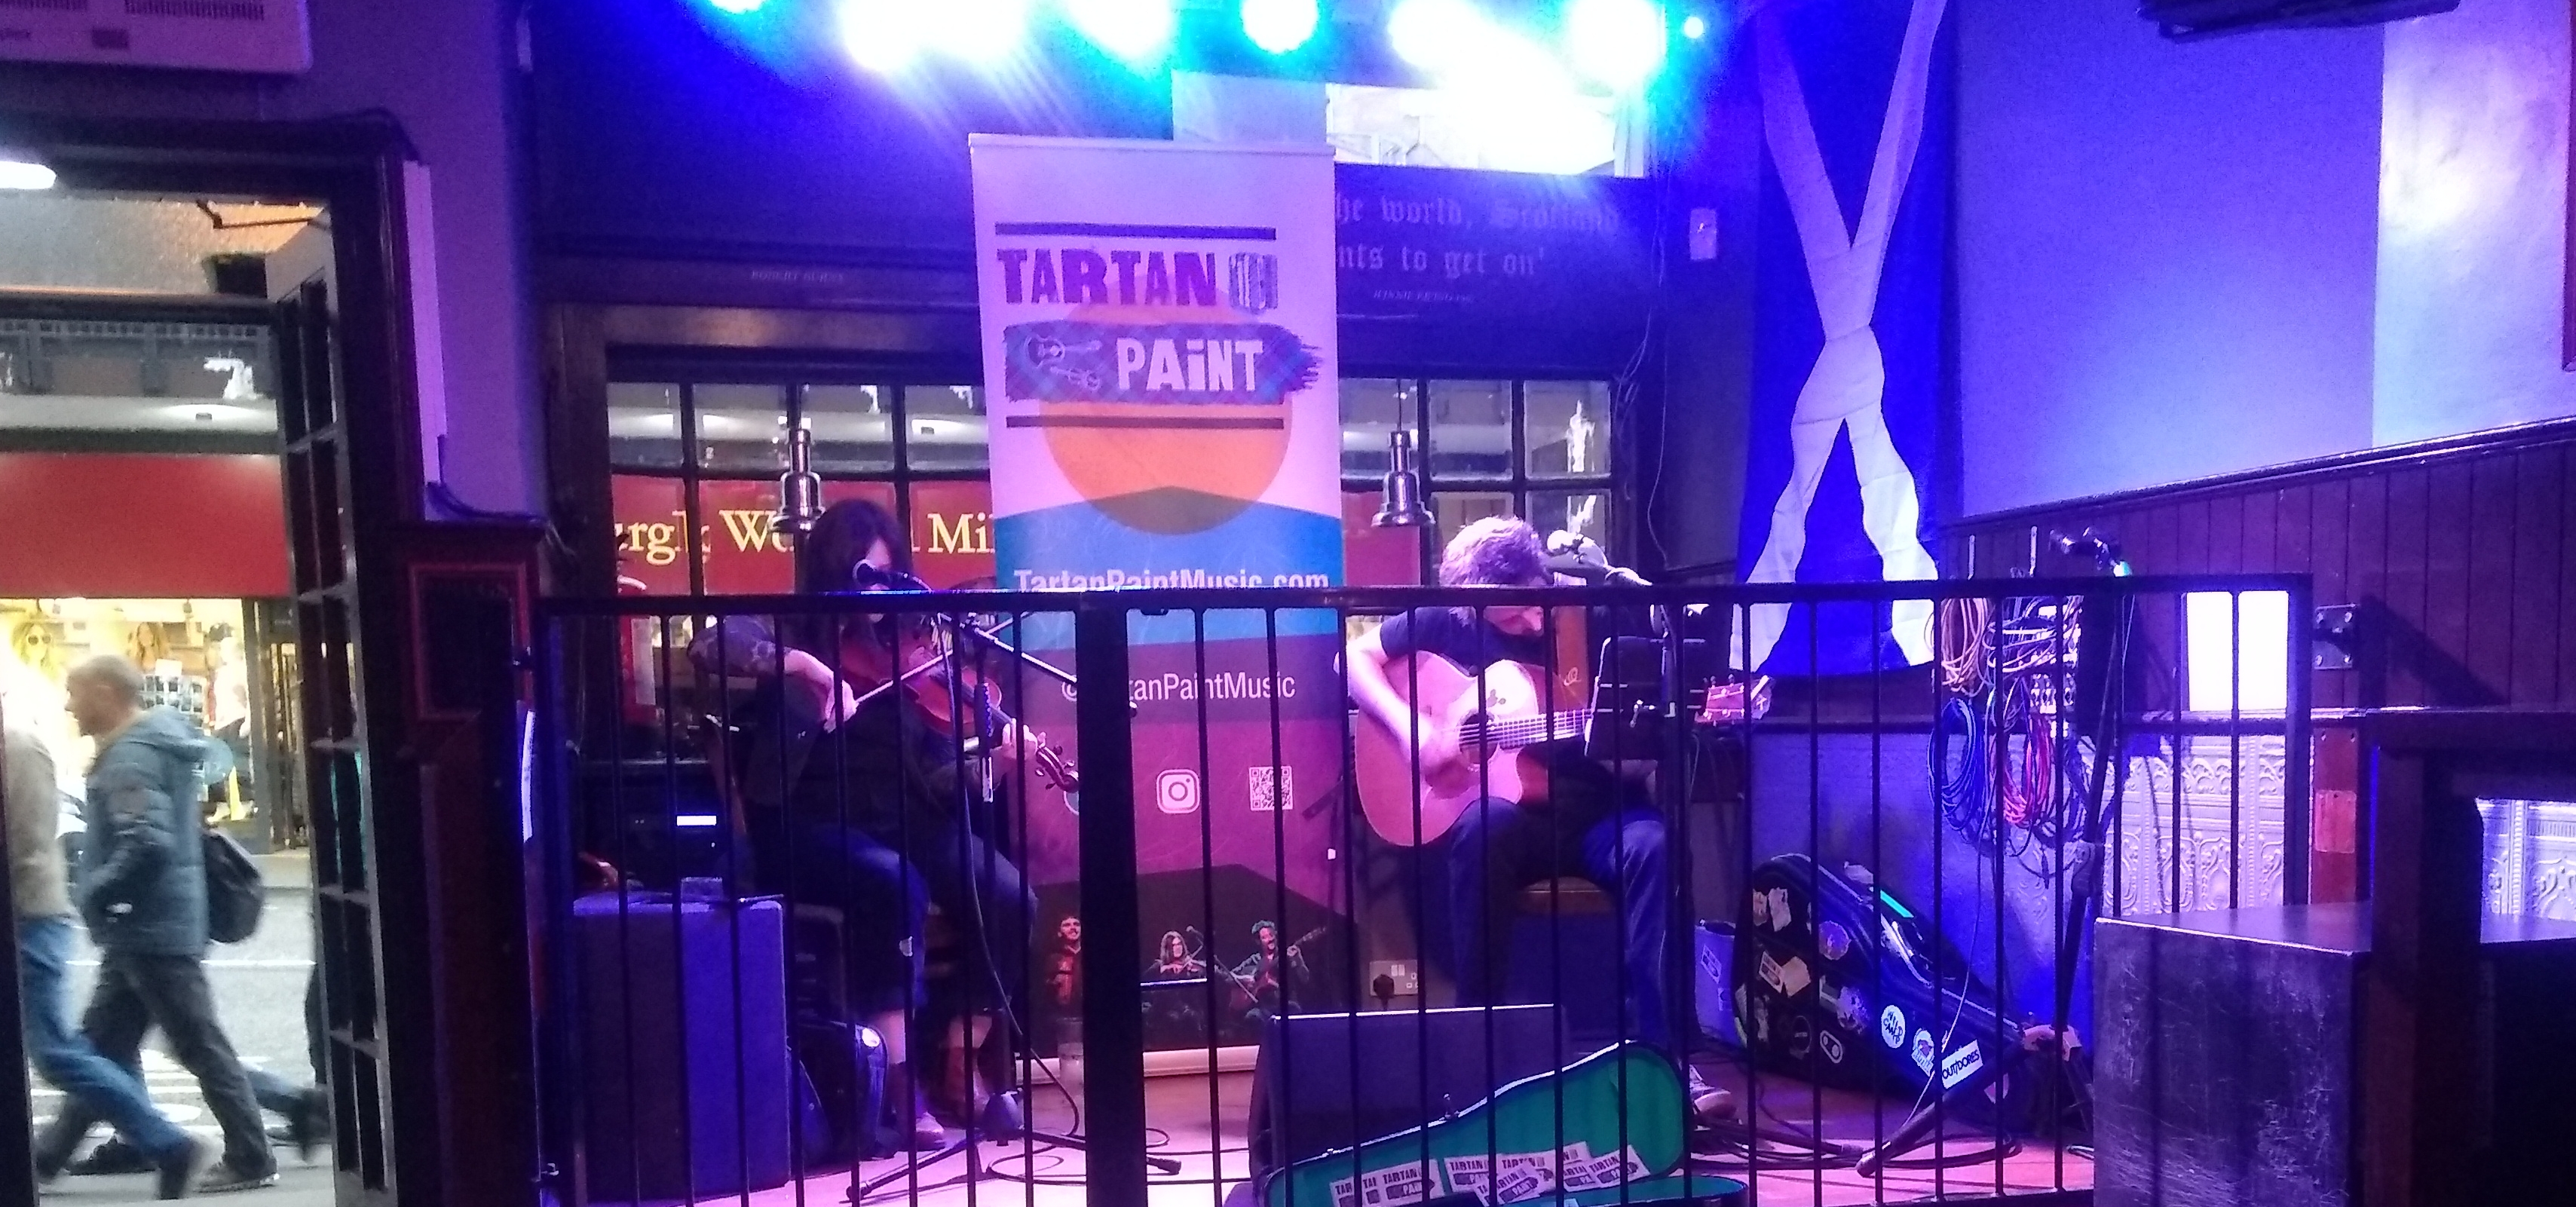 Tartan Paint band playing in pub at night